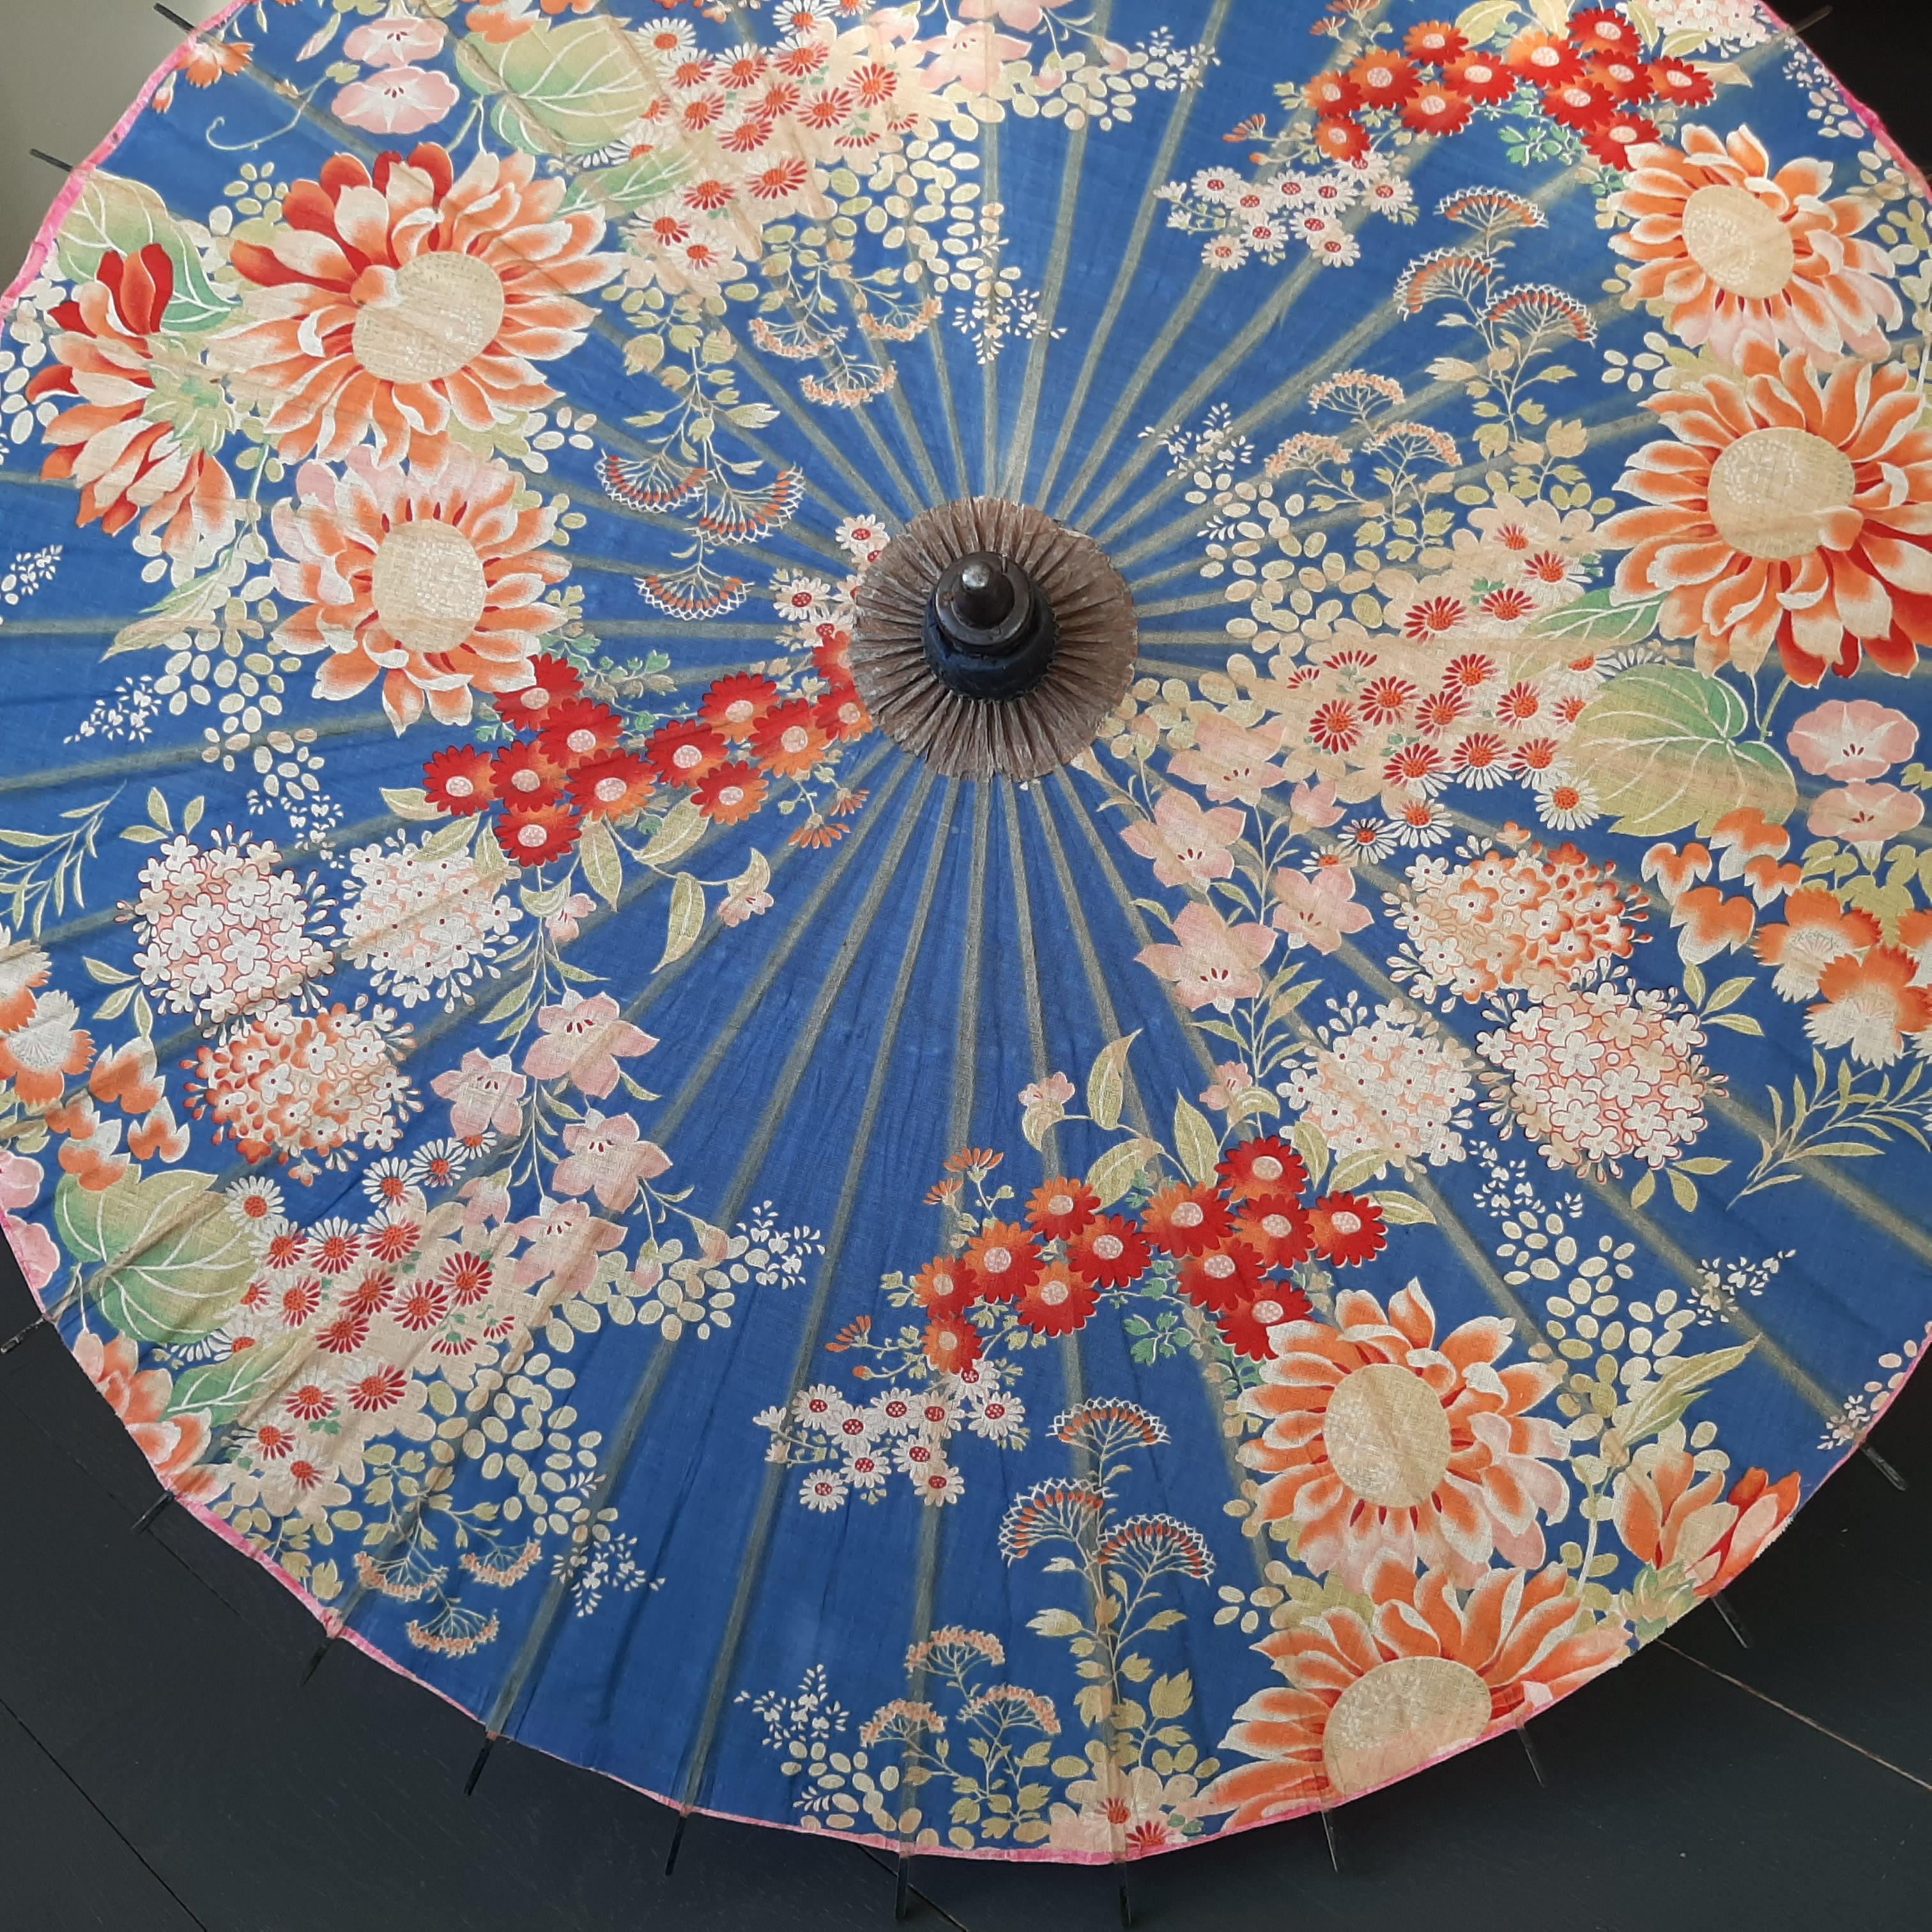 Beautiful Japanese Umbrella/Parasol for sun protection. Made of floral cloth, wood and bamboo. Highly decorative. Probably, 1930s. Measures: Length 55 cm.